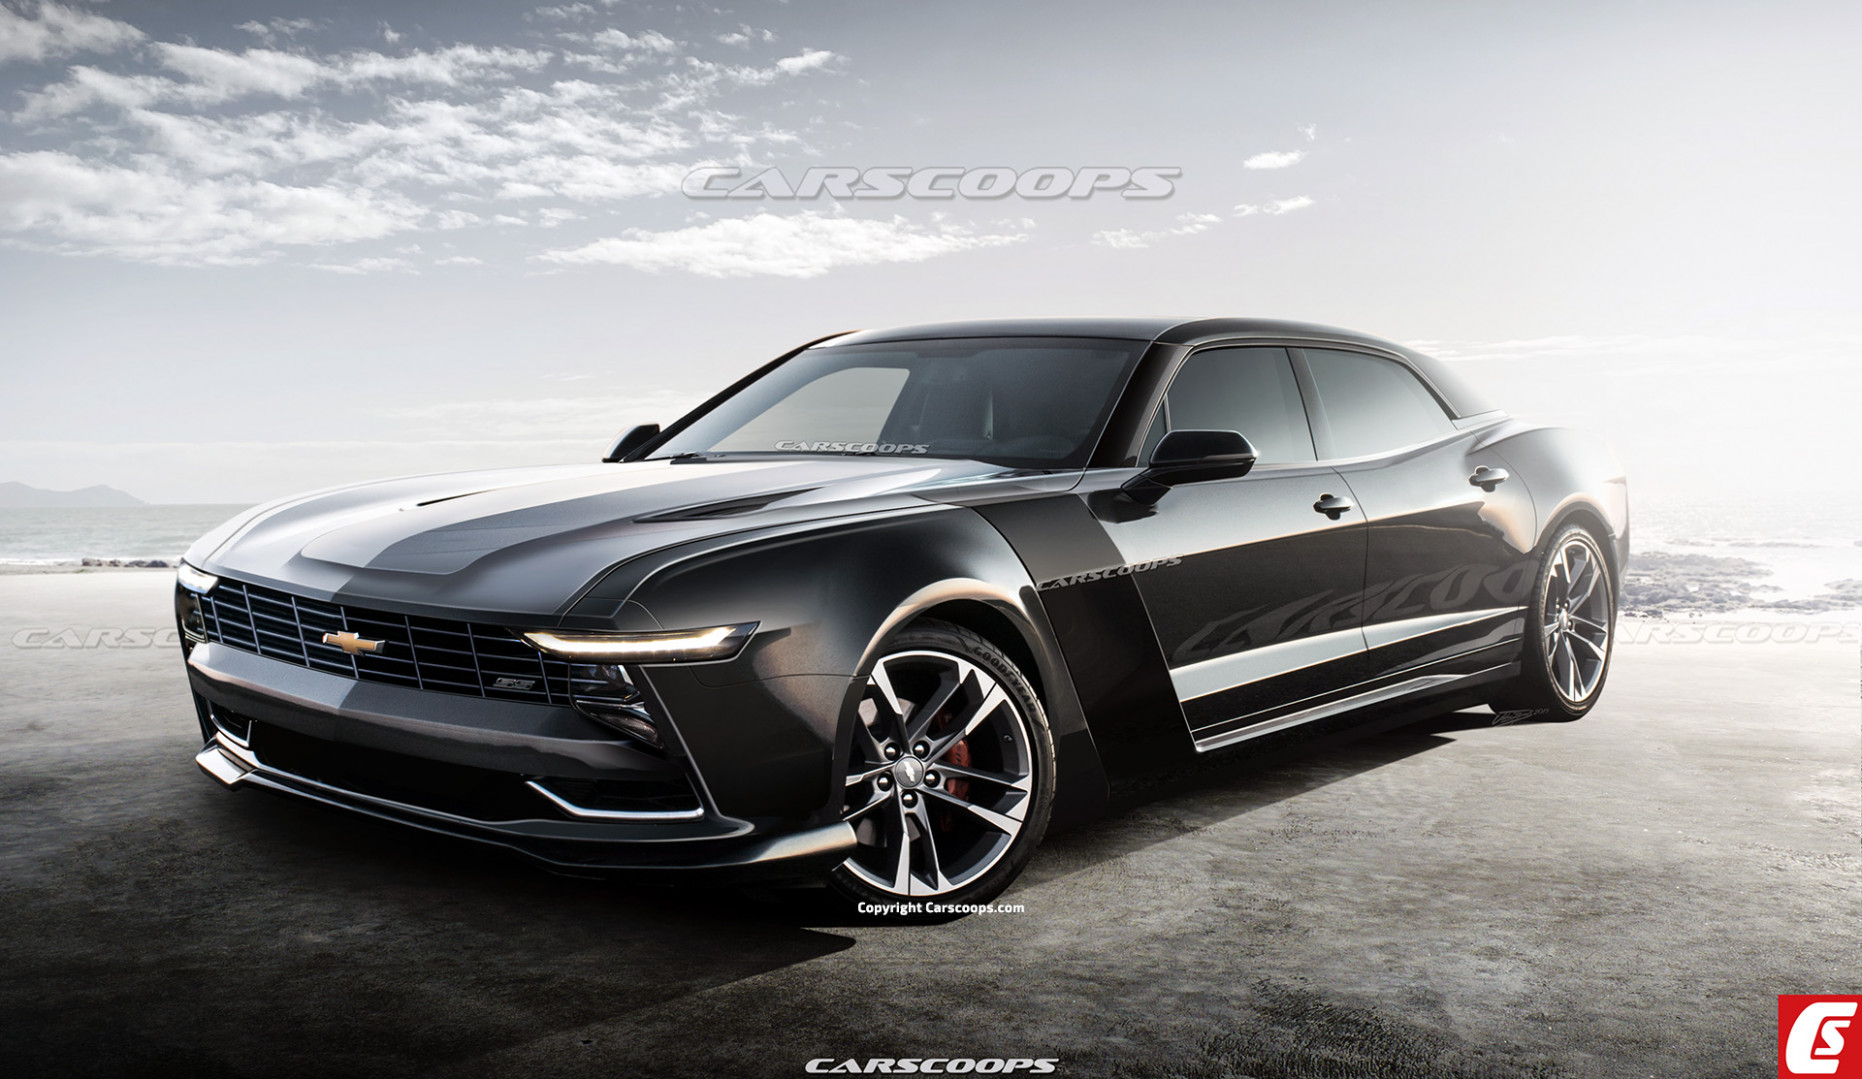 Rumors Will There Be A 2022 Chevrolet Impala